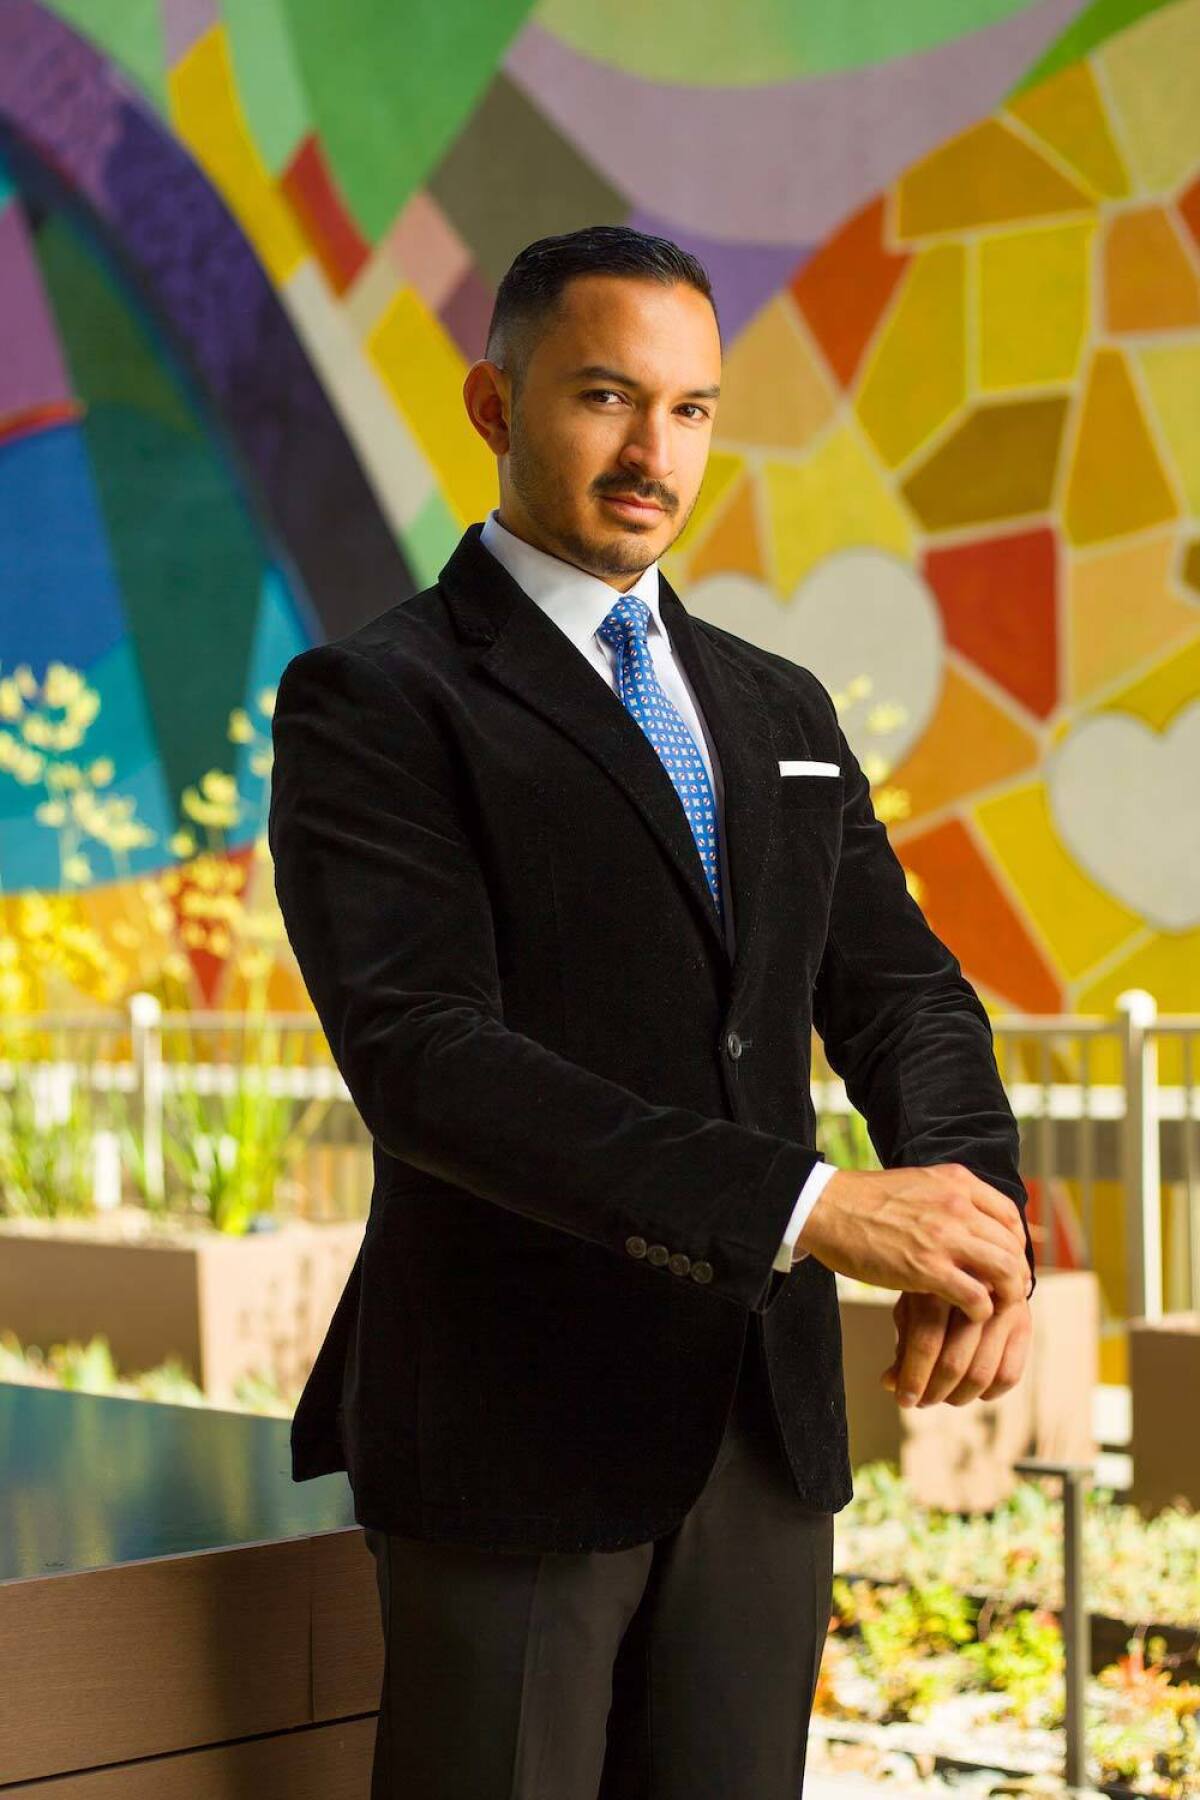 Immanuel Ontiveros created men's accessories and tie brand Lord Wallington.